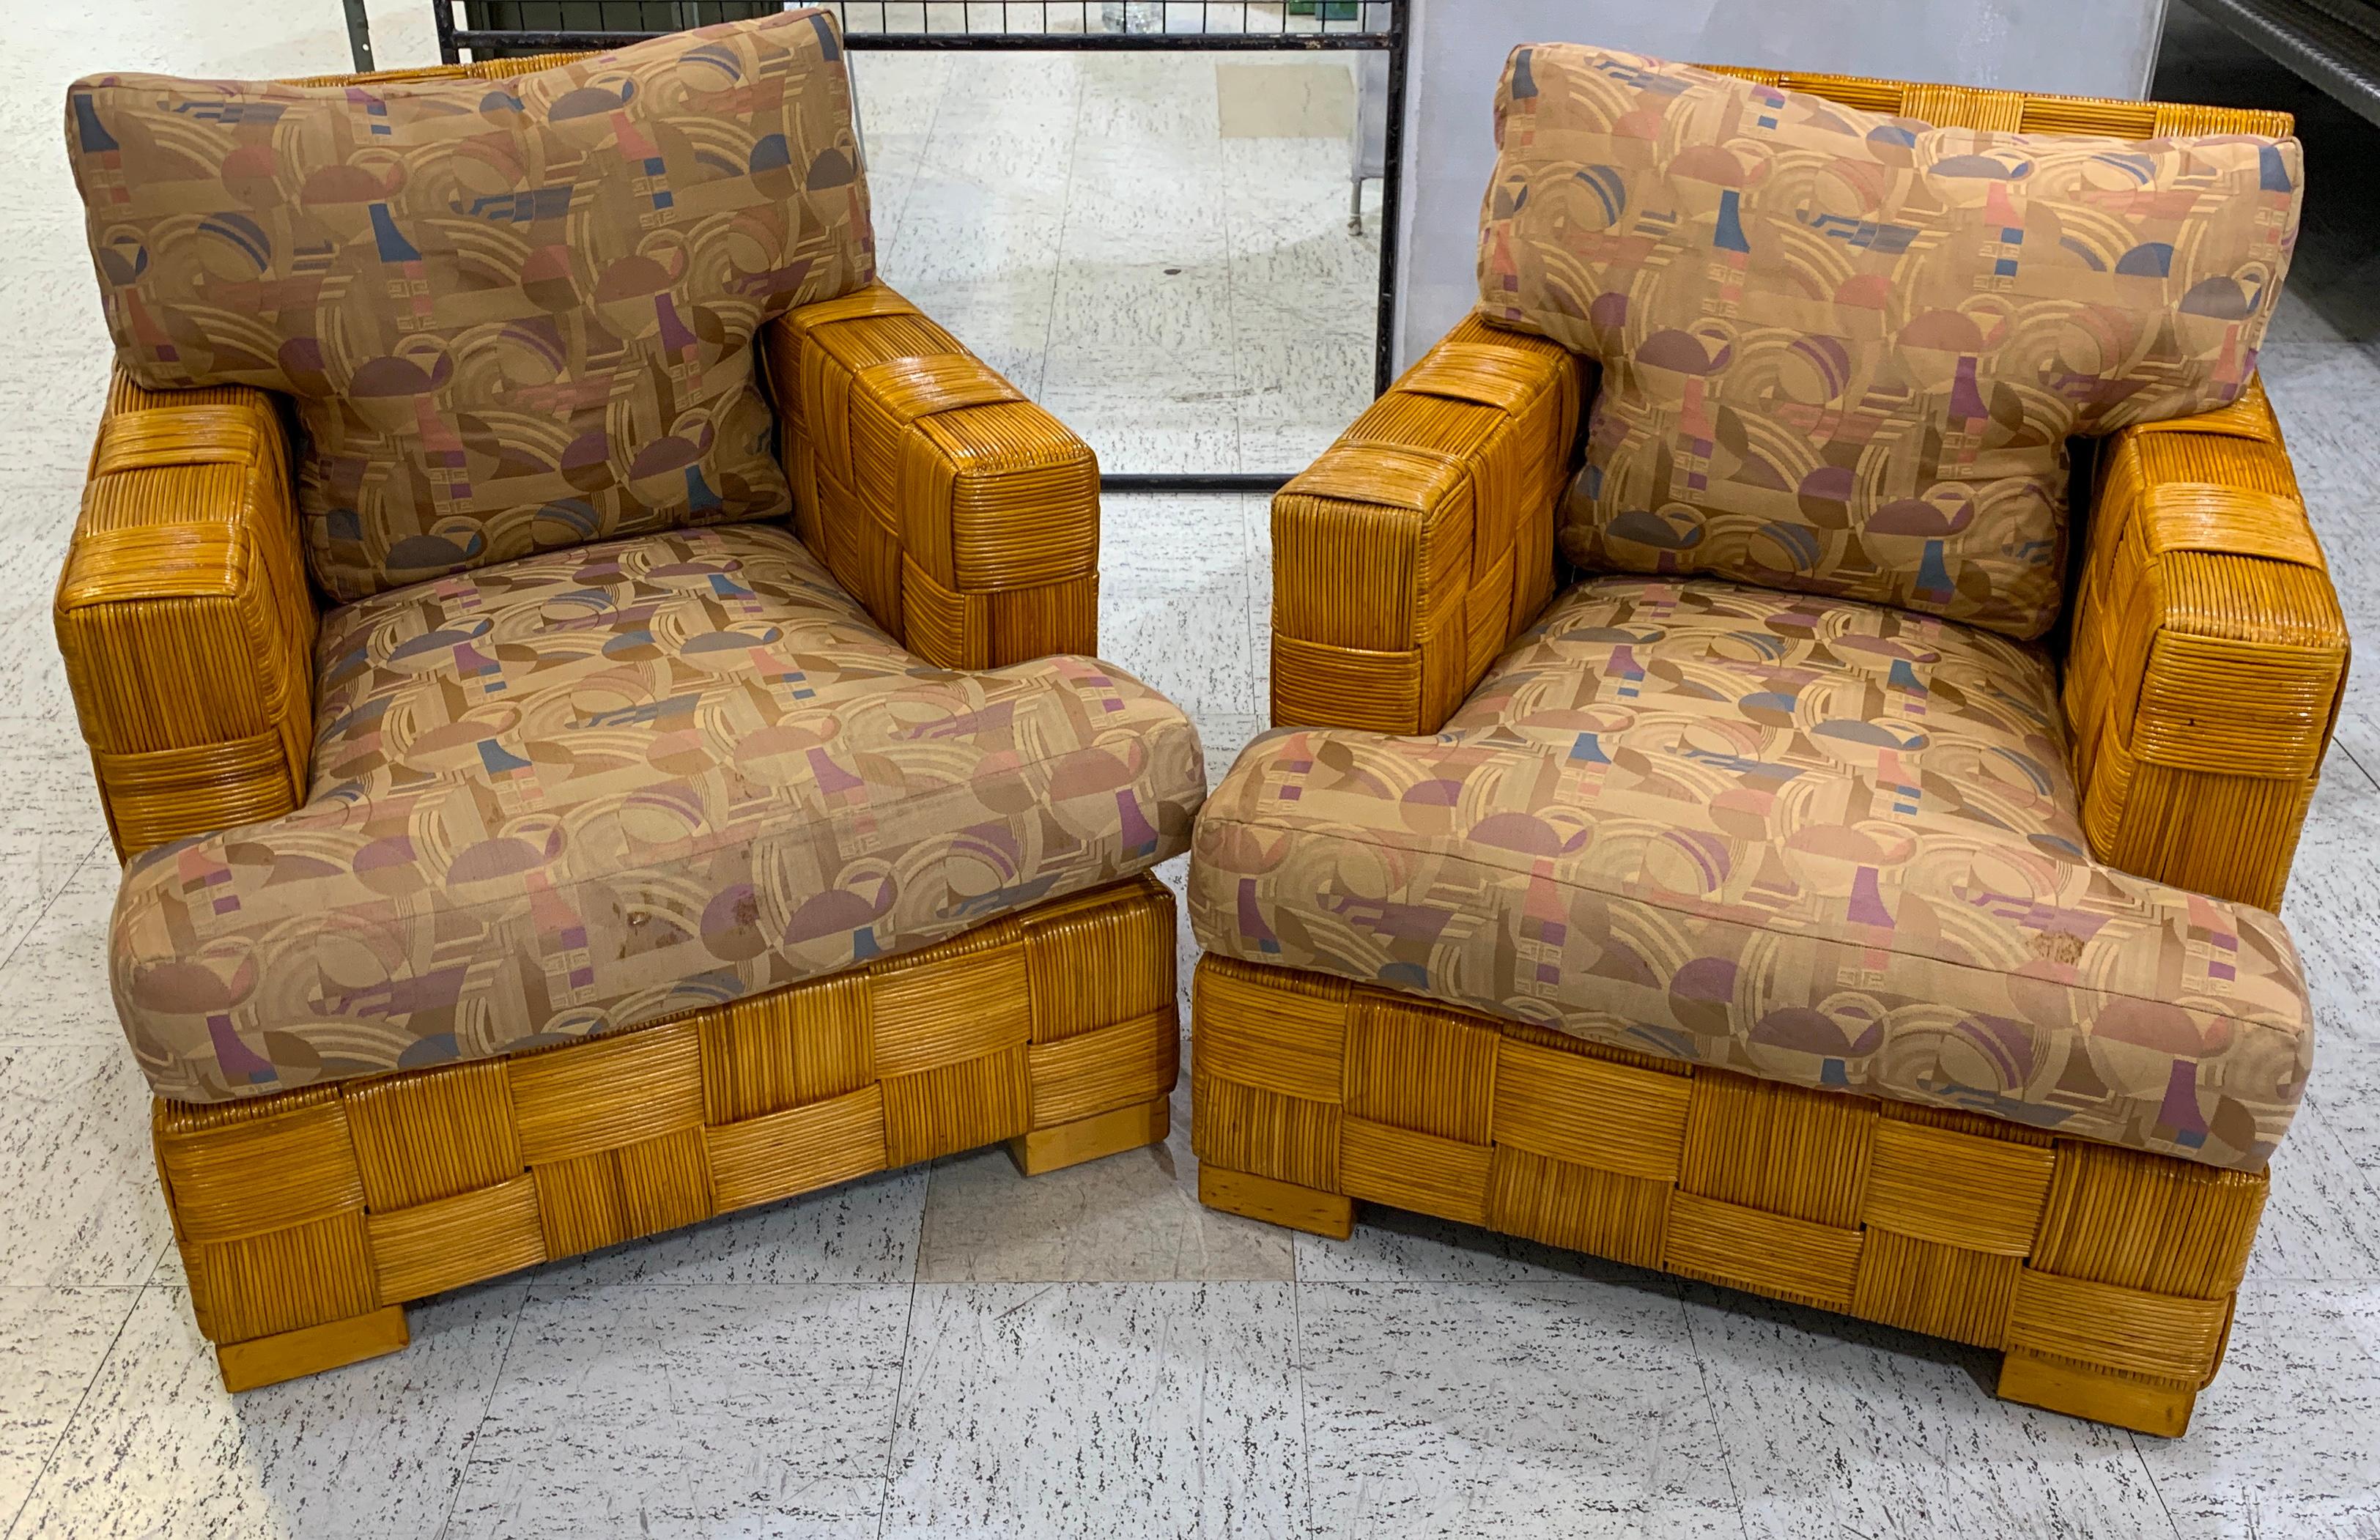 Pair of Donghia woven rattan block Island club chairs by John Hutton, Each one beautifully constructed and woven, warm even color and patina. Retains original Donghia fabric, useable or ready for upholstery. Stamped Donghia.